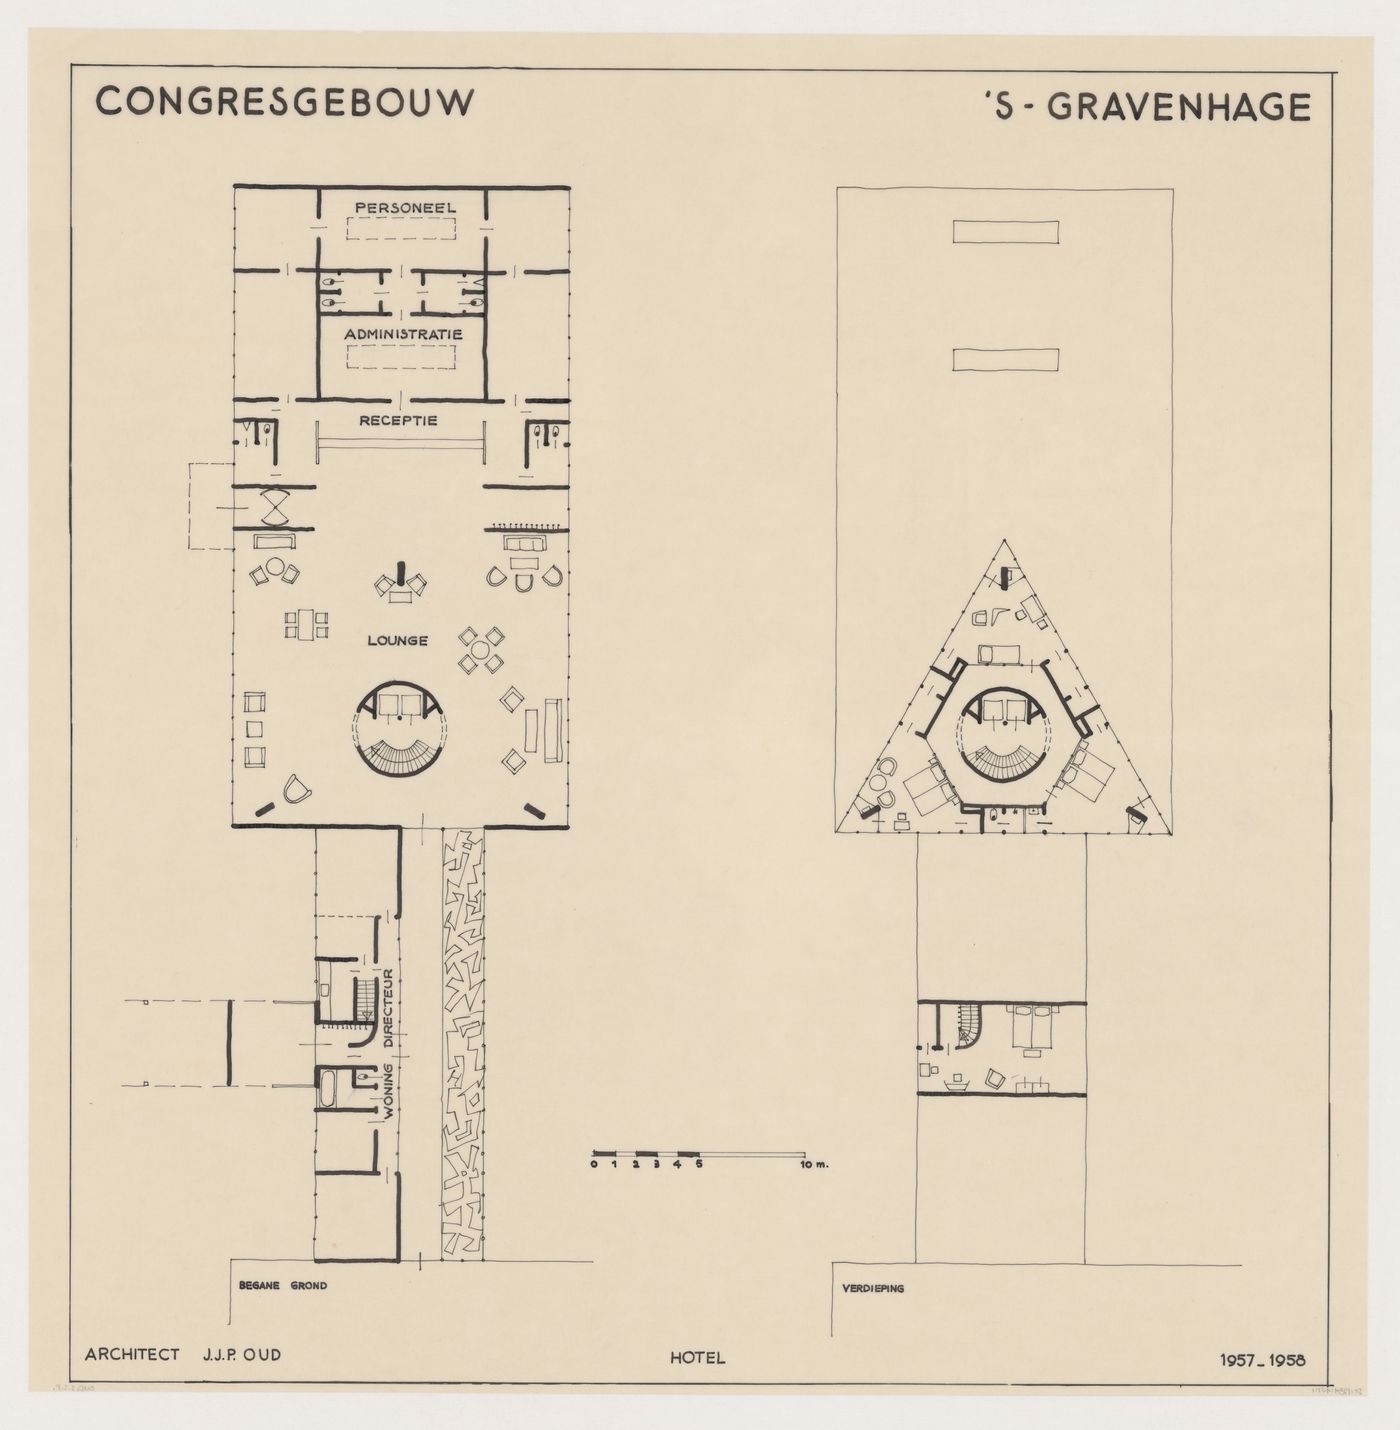 Ground and first floor plans for the hotel for the Congress Hall Complex, The Hague, Netherlands